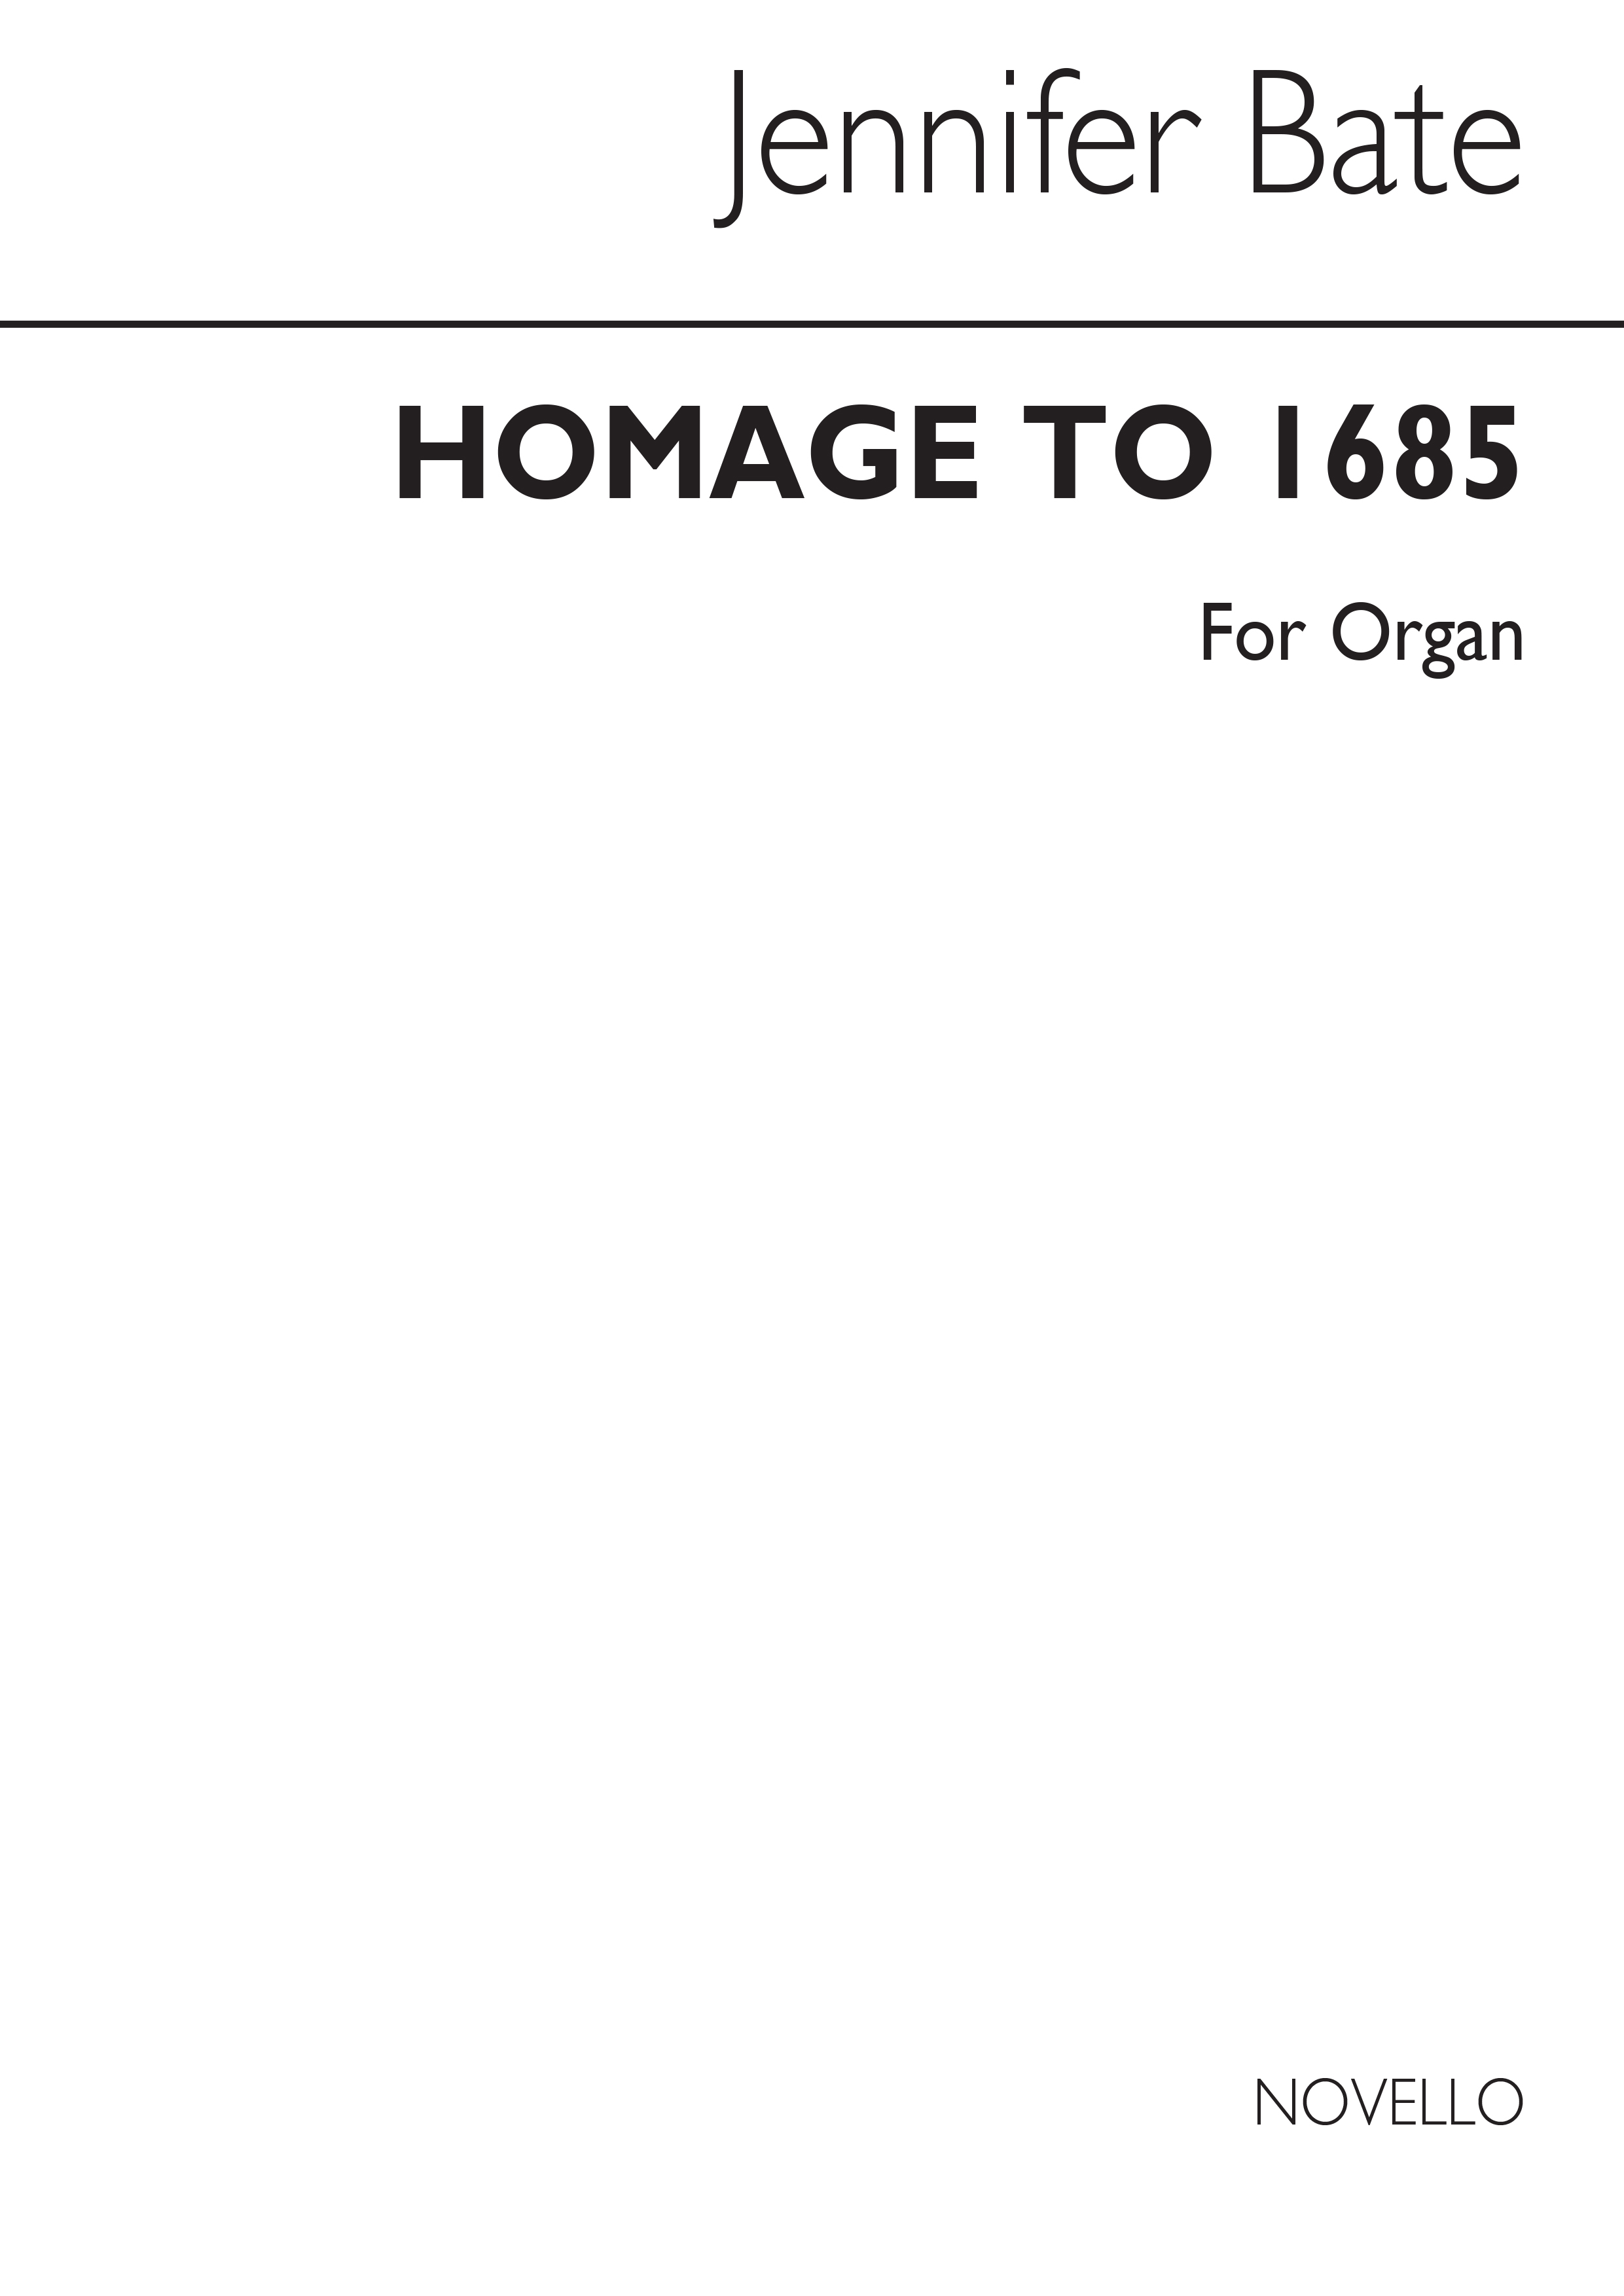 Bate: Homage to 1685 for Organ